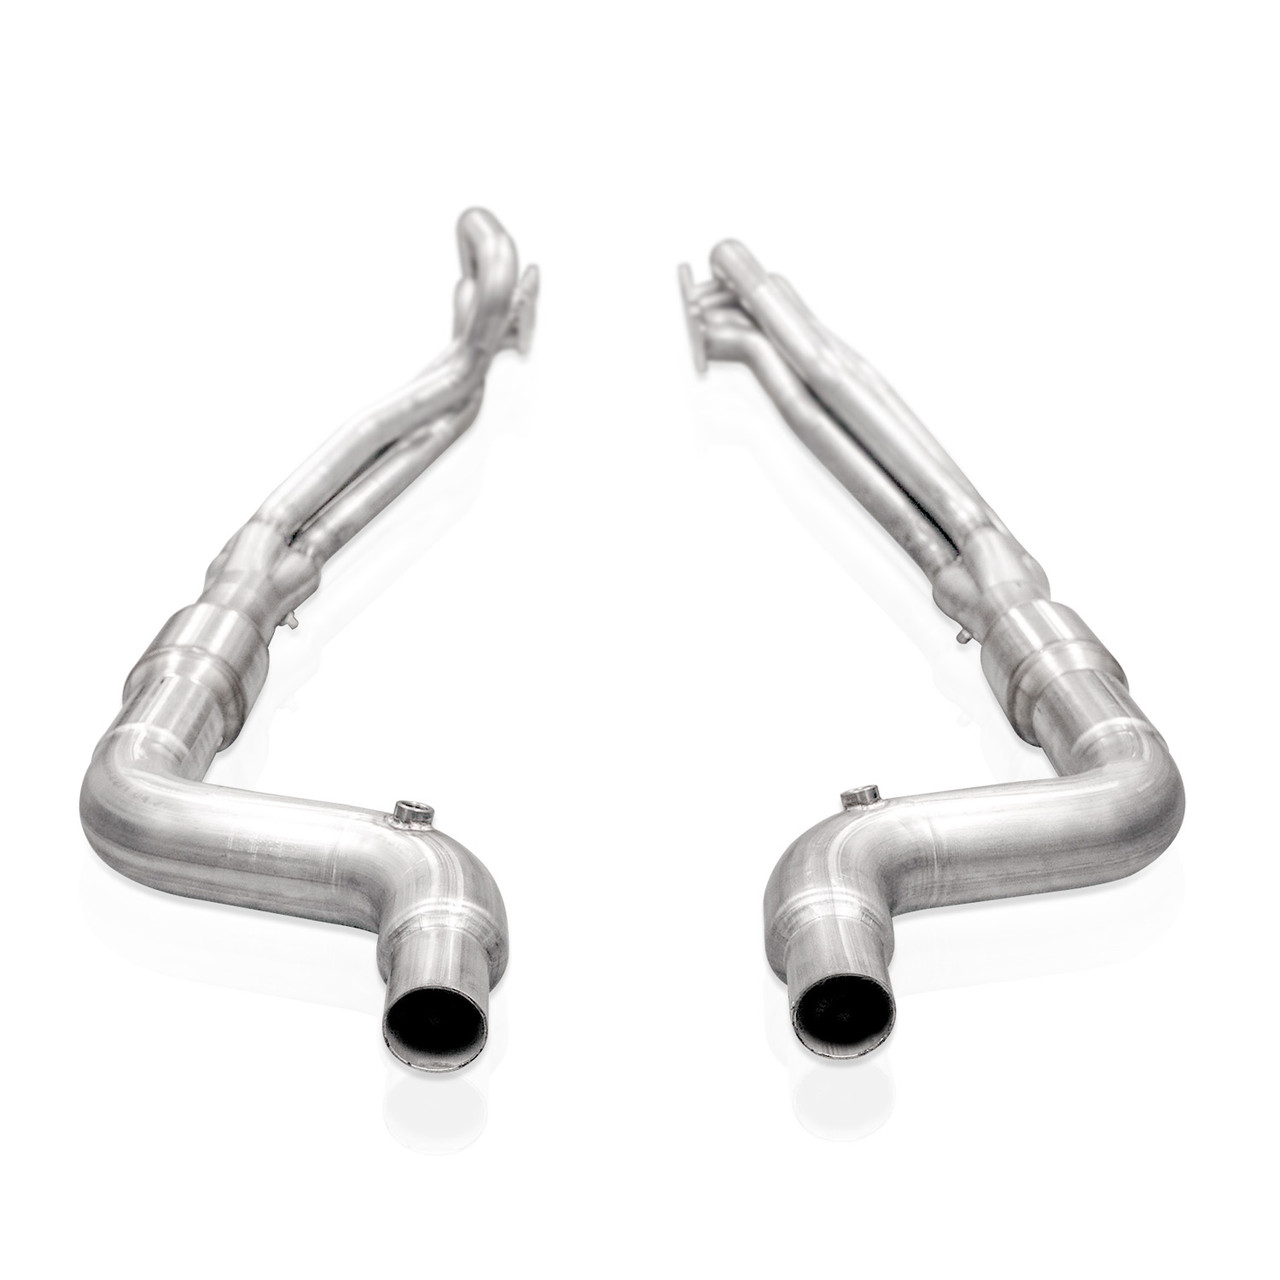 Stainless Works 2" Long Tube Headers w. High Flow Cats / Aftermarket Connect - S550 / S650 Mustang (M242H3CATLG)